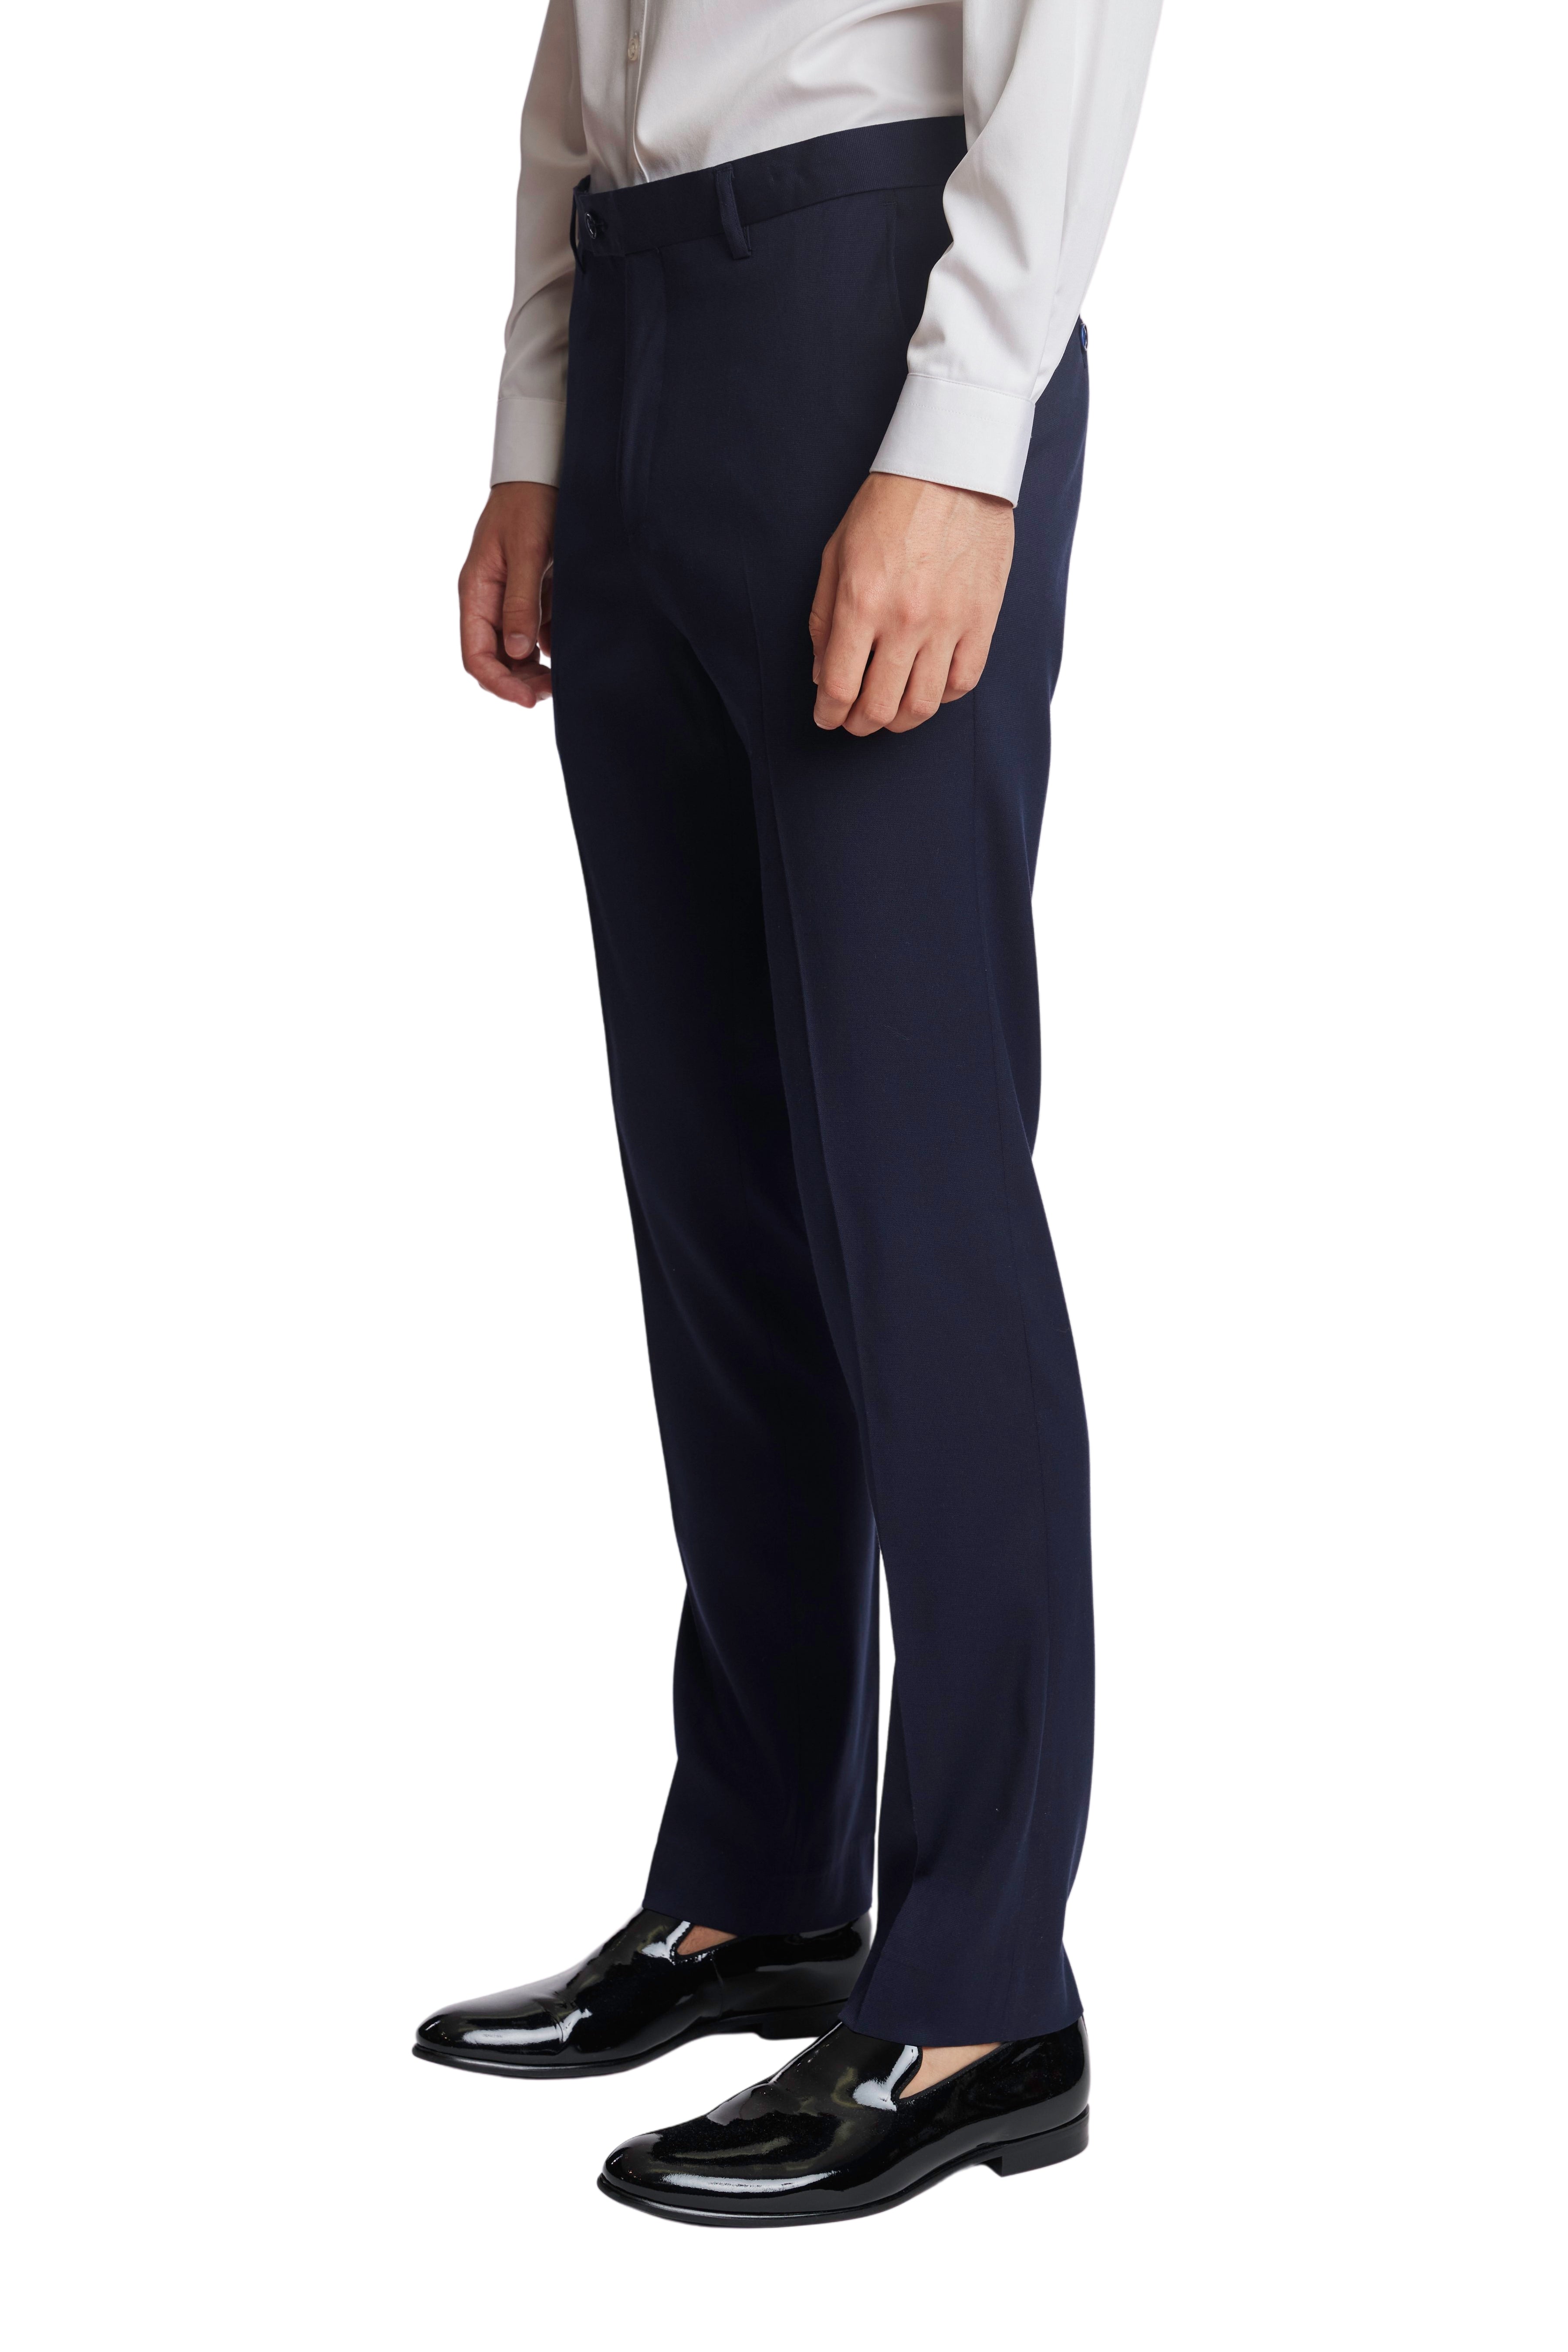 Modern Fit - Downing Pants - Naval Blue